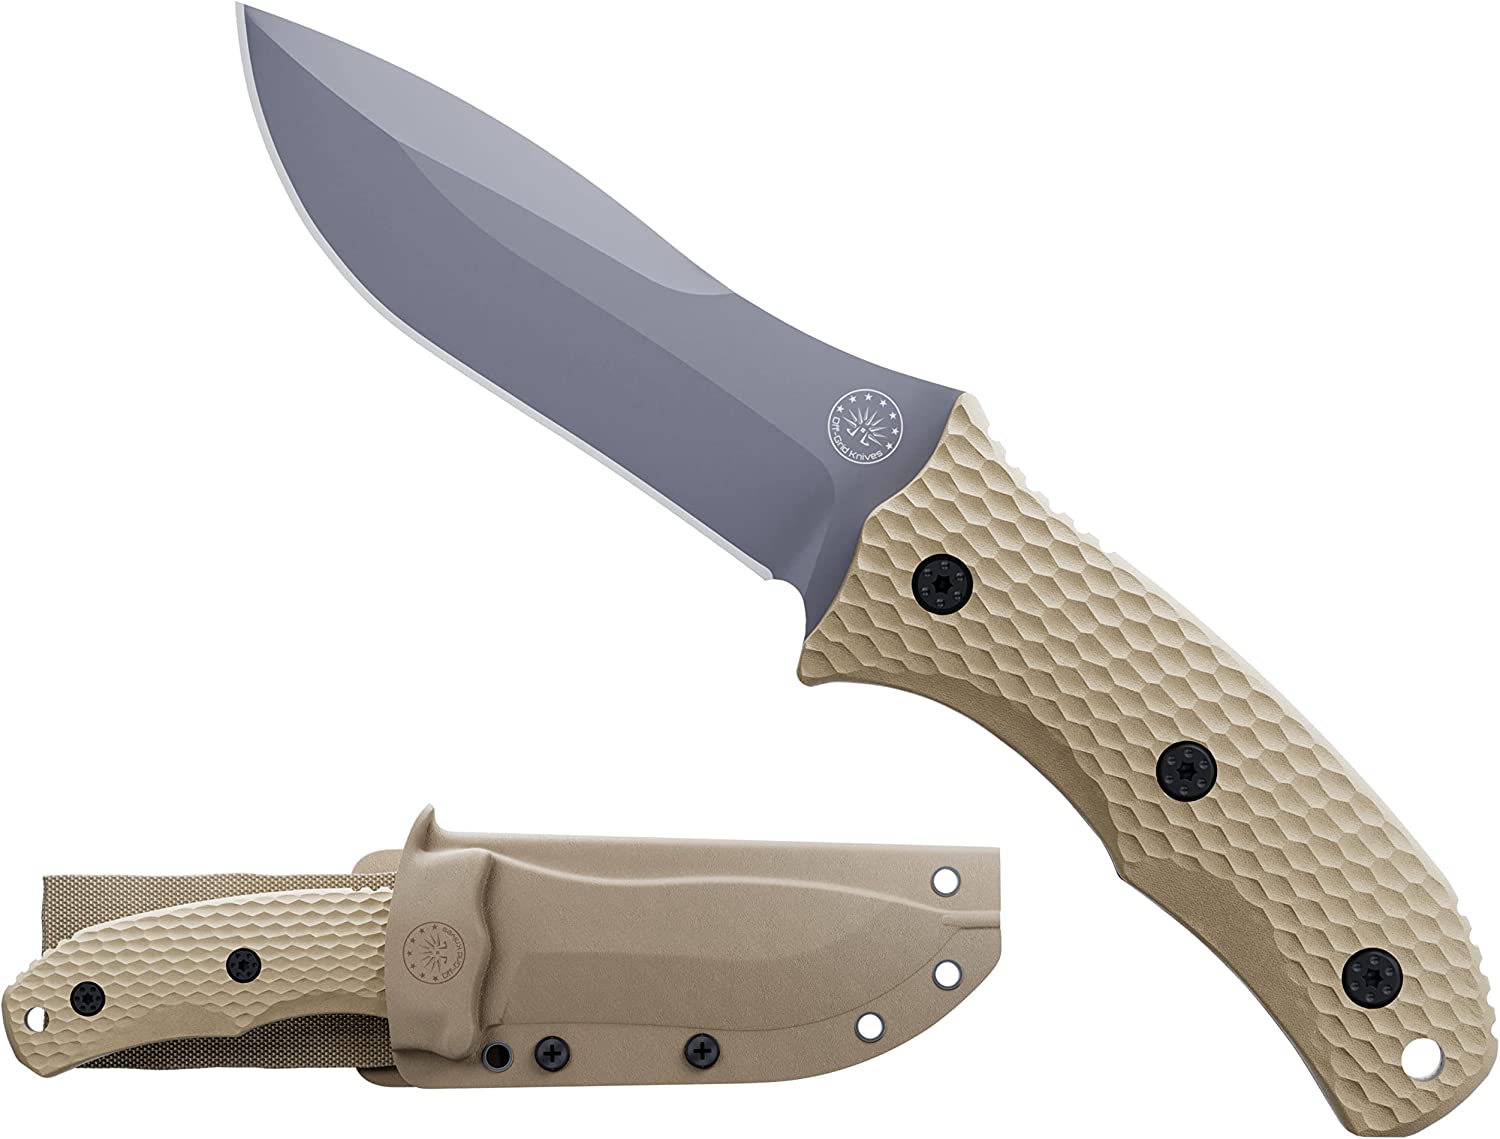 Off-Grid Knives – Backcountry Coyote V2 Fixed Blade – Cryo D2 Steel Knife with Graywash Finish, Full Tang, Coyote Tan G10 Scales, Kydex Sheath, Bushcraft, Hunting, Survival, Camping, Tactical Use